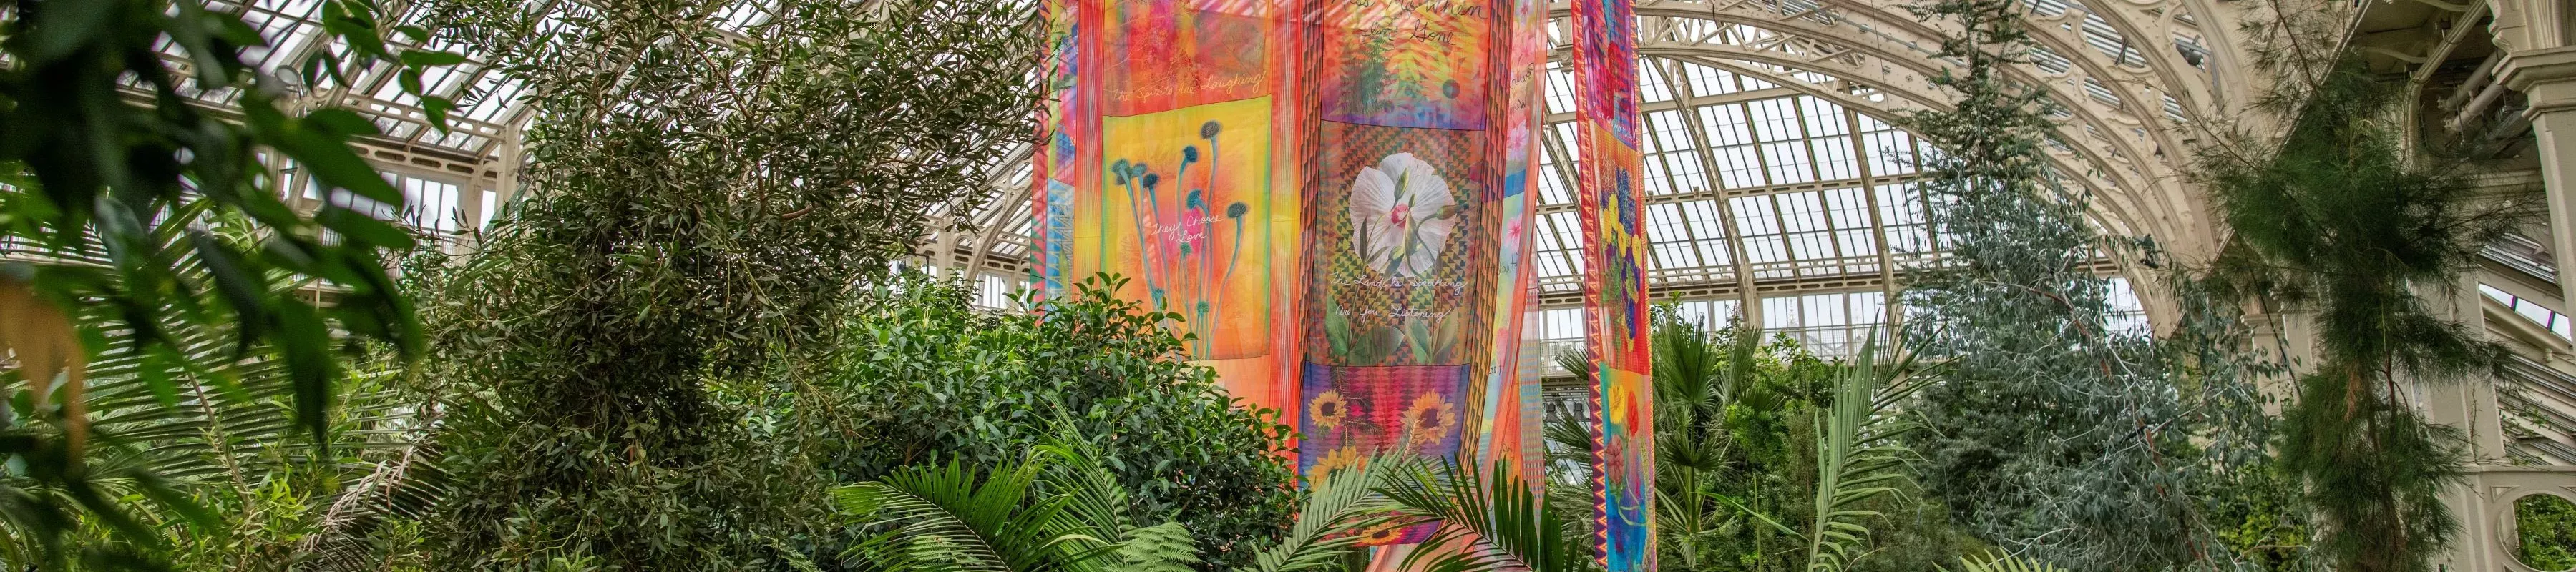 A large colourful hanging banner in a Victorian greenhouse full of green plants